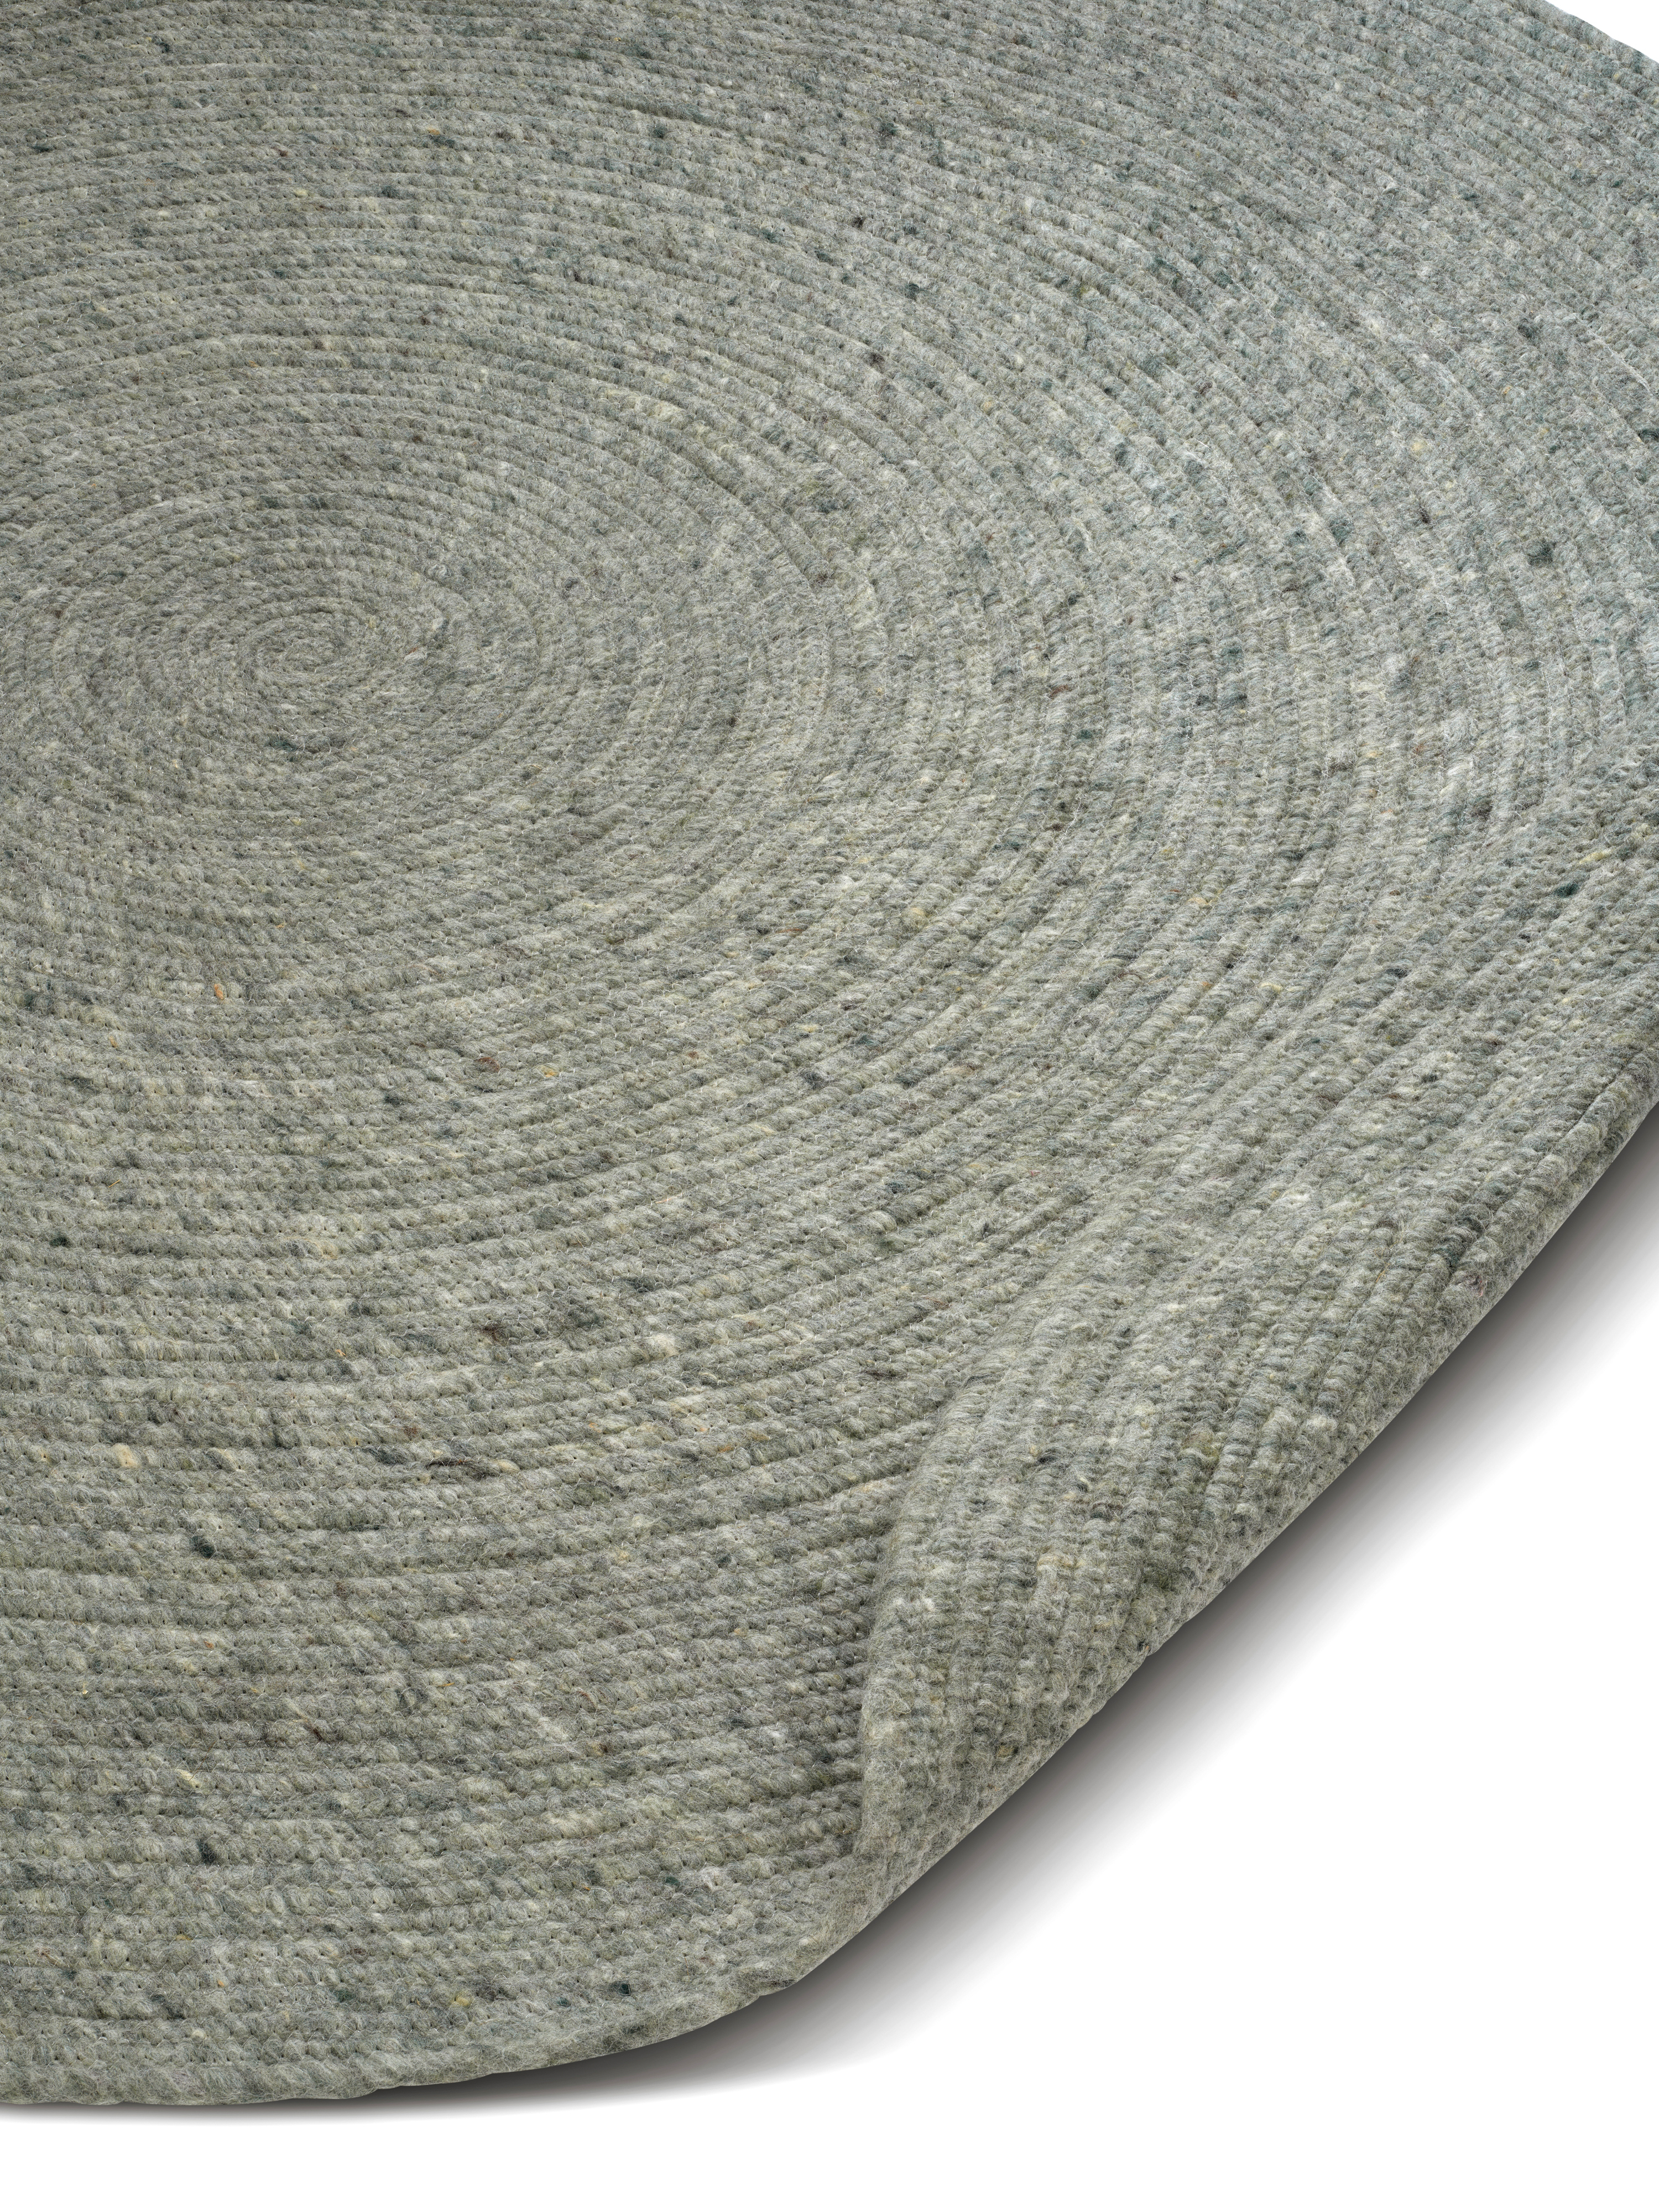 Merino wool carpet round Ø160 cm from Classic Collection